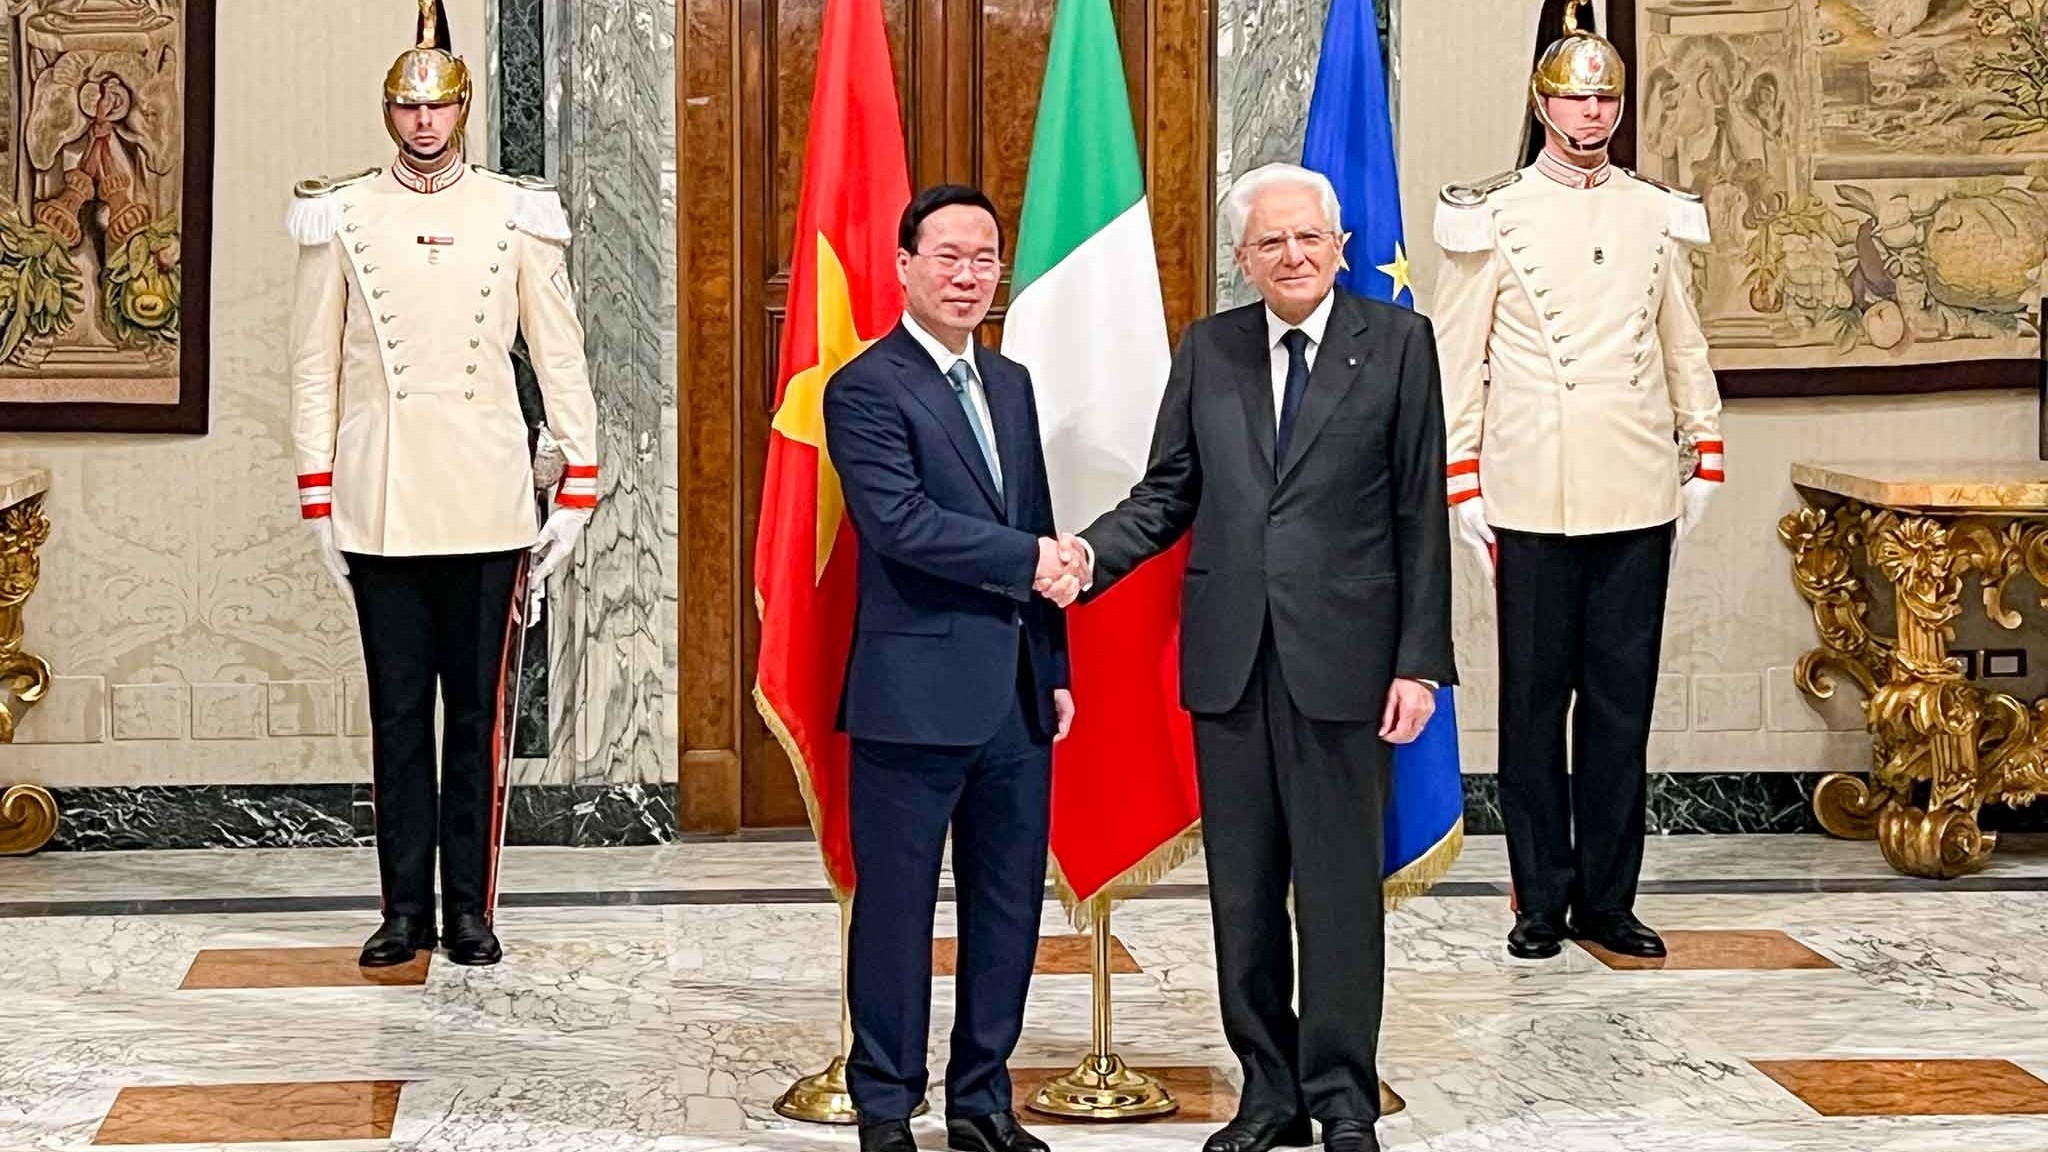 Vietnam, Italy issue joint statement